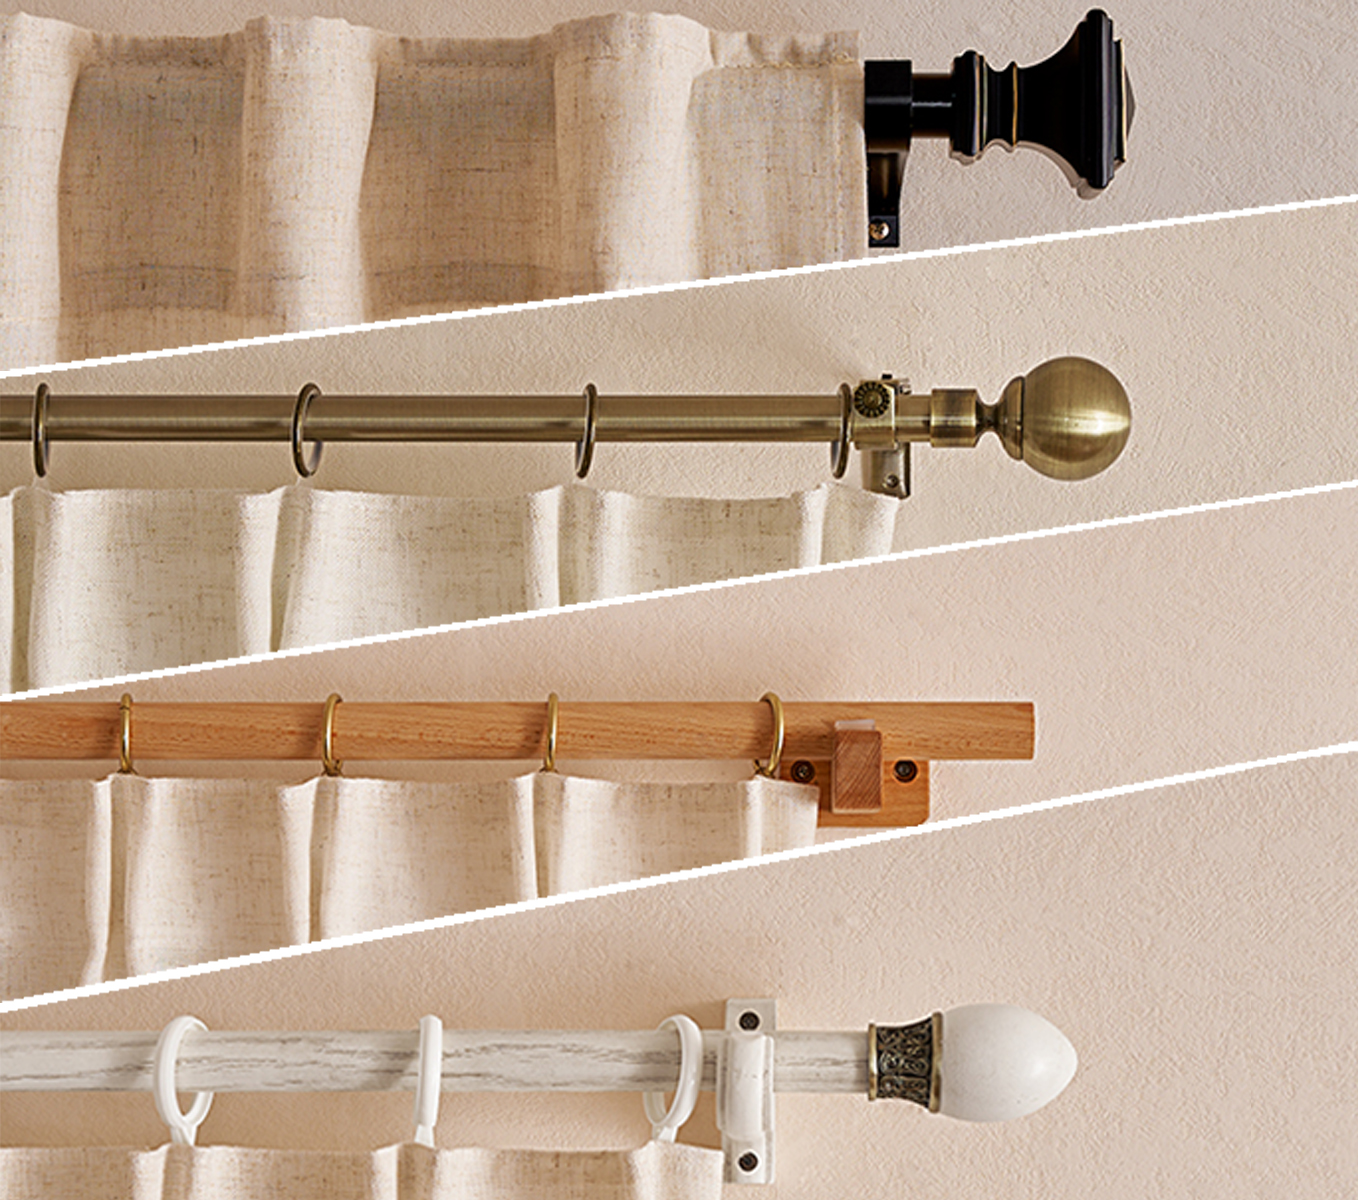 measuring and selecting curtain rods